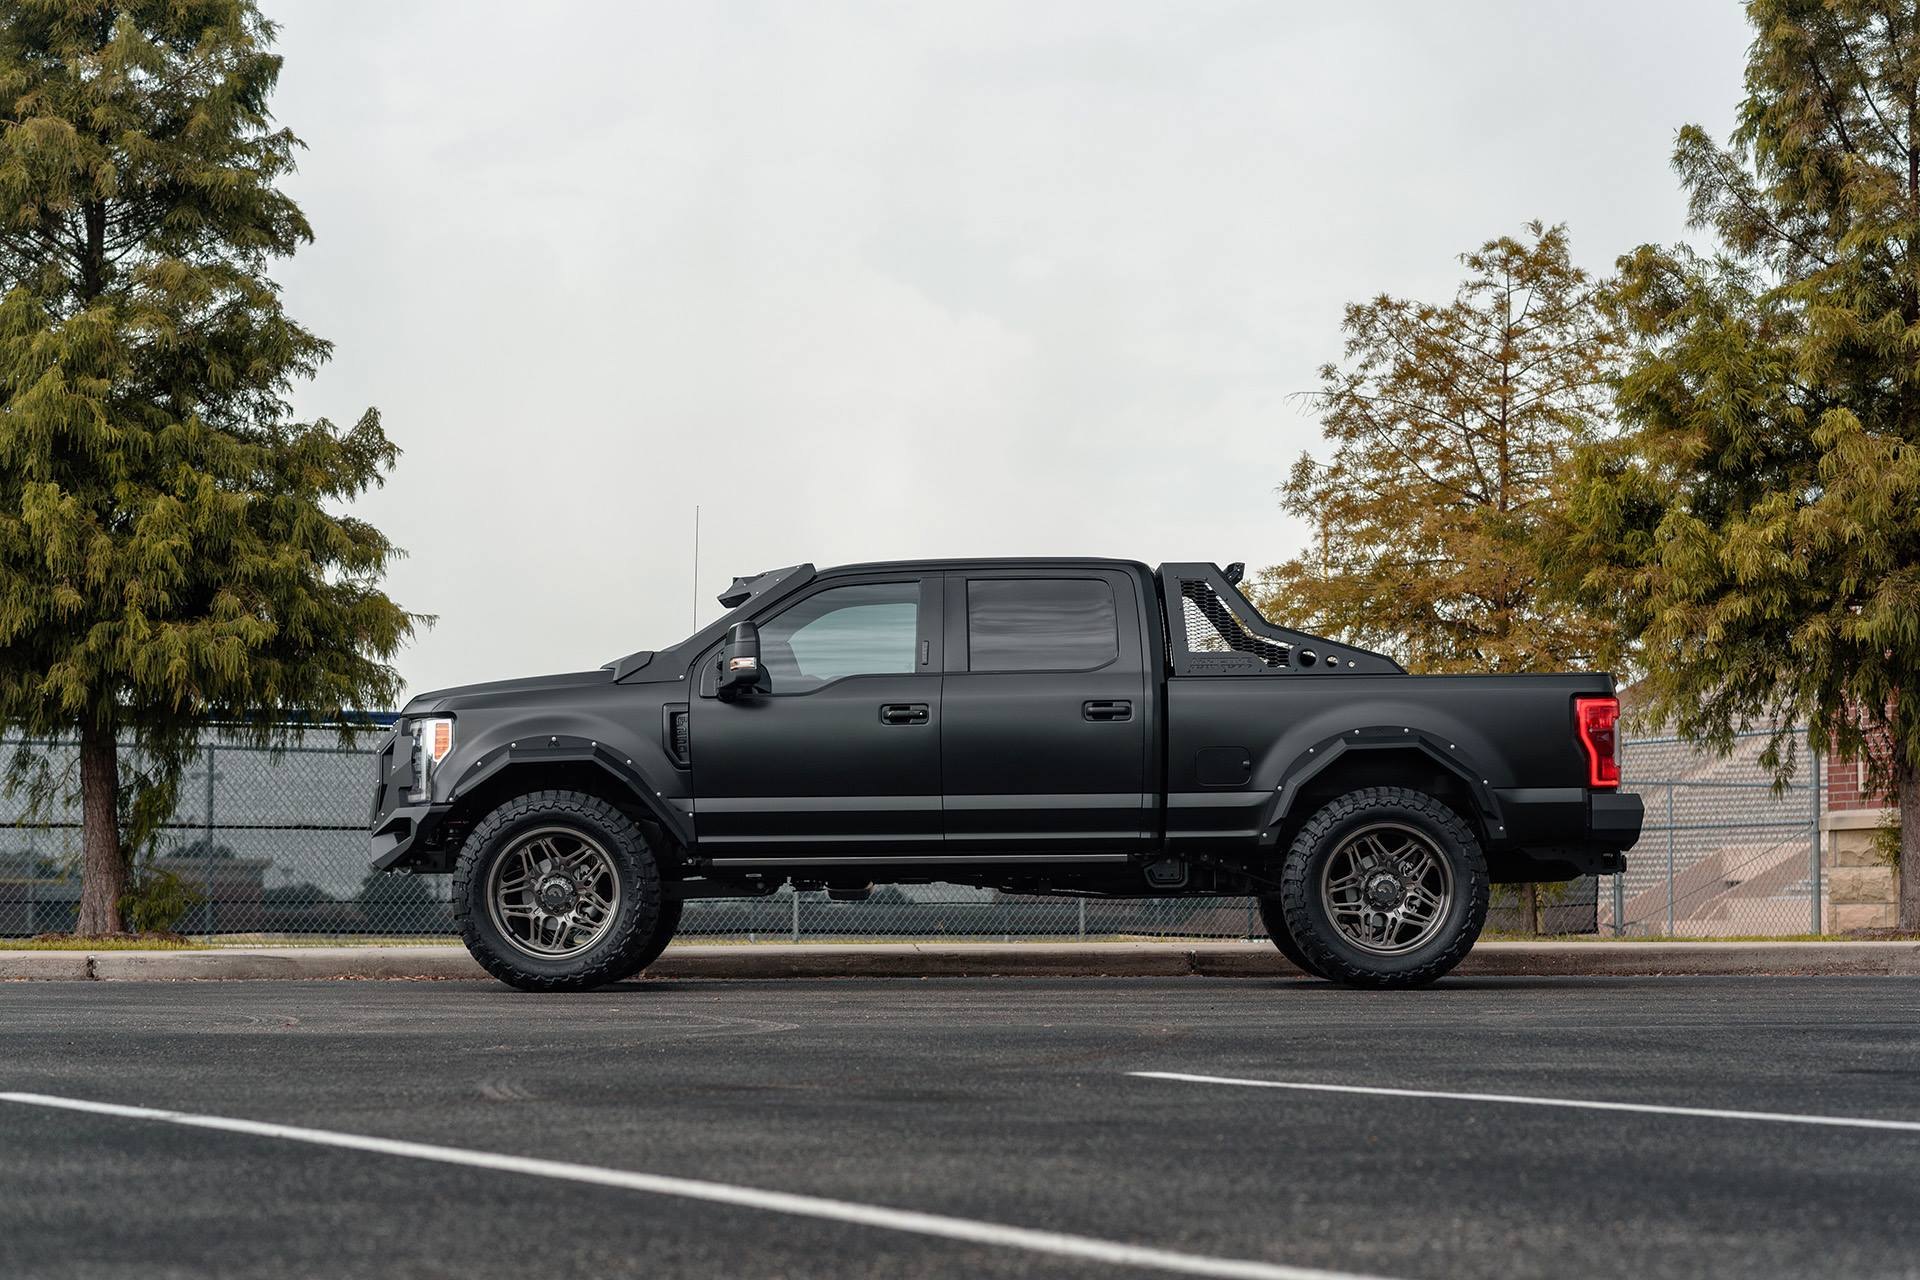 Matte Black Ford F-250 with Aftermarket Fender Flares - Photo by Forgiato